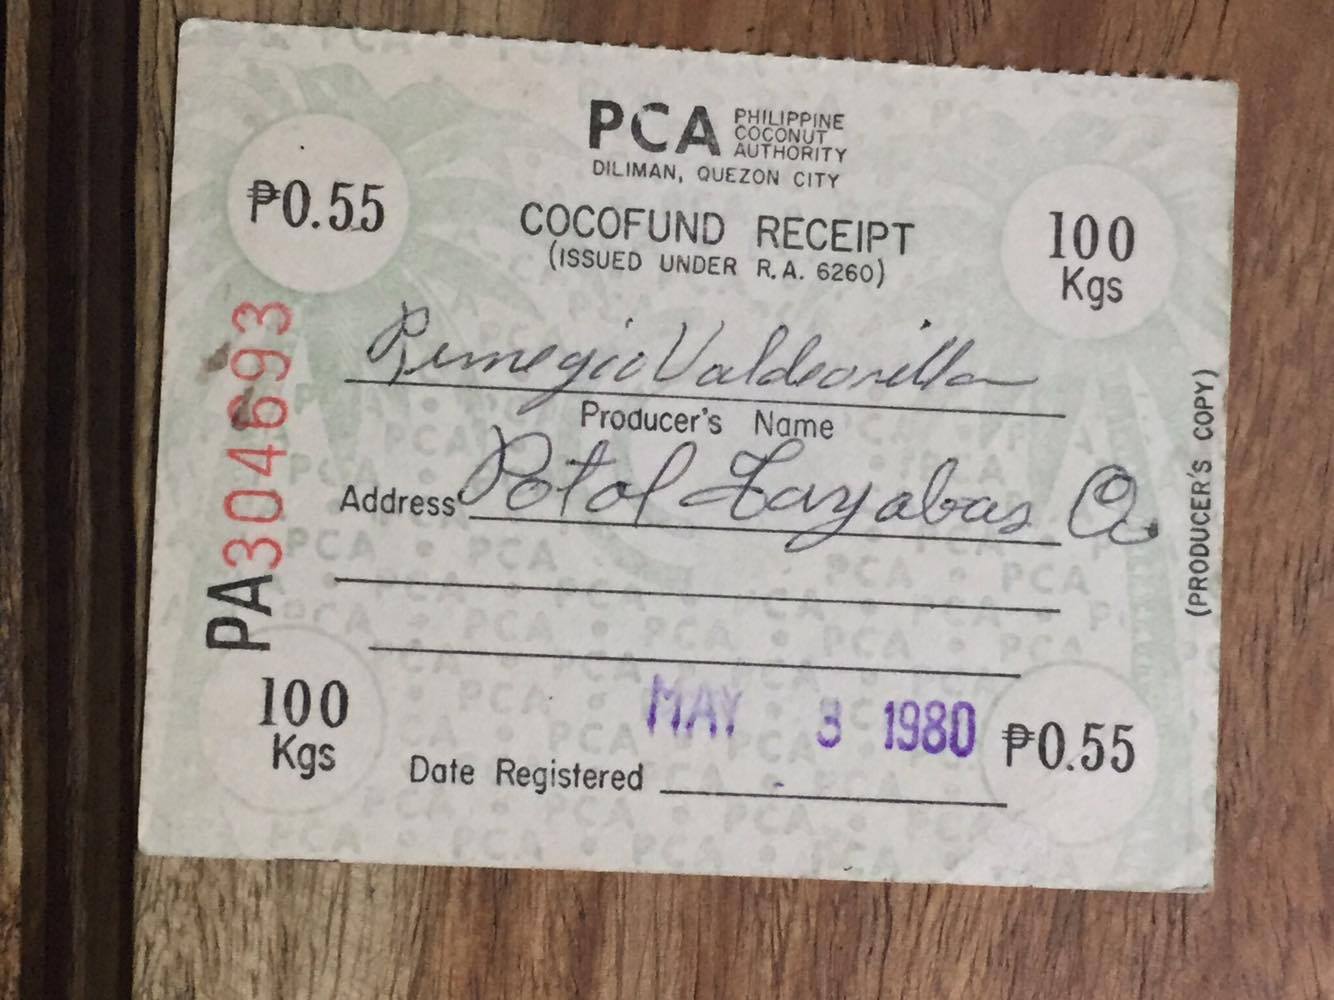 TAX. This shows that on May 8, 1980, Aling Rosing's husband was deducted 55 centavos for 100 kilos of his copra.  